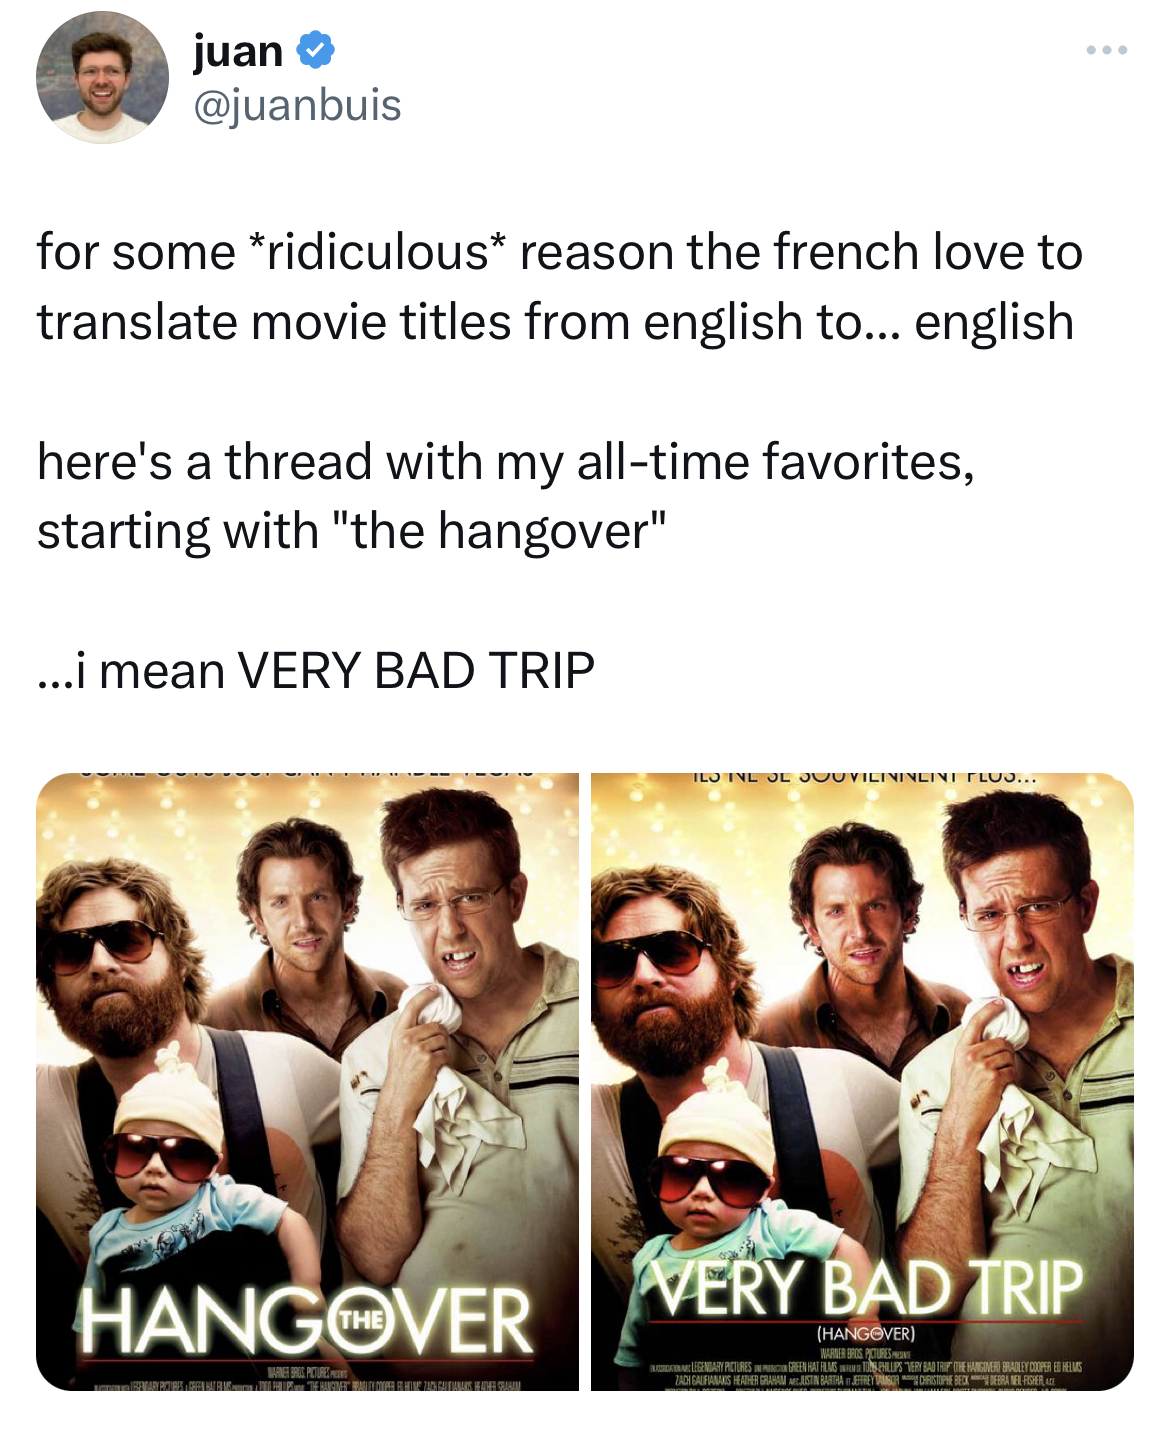 savage and funny tweets -juan for some ridiculous reason the french love to translate movie titles from english to... english here's a thread with my alltime favorites, starting with "the hangover" ...i mean Very Bad Trip Hangover Walinefo... Very Bad Tri